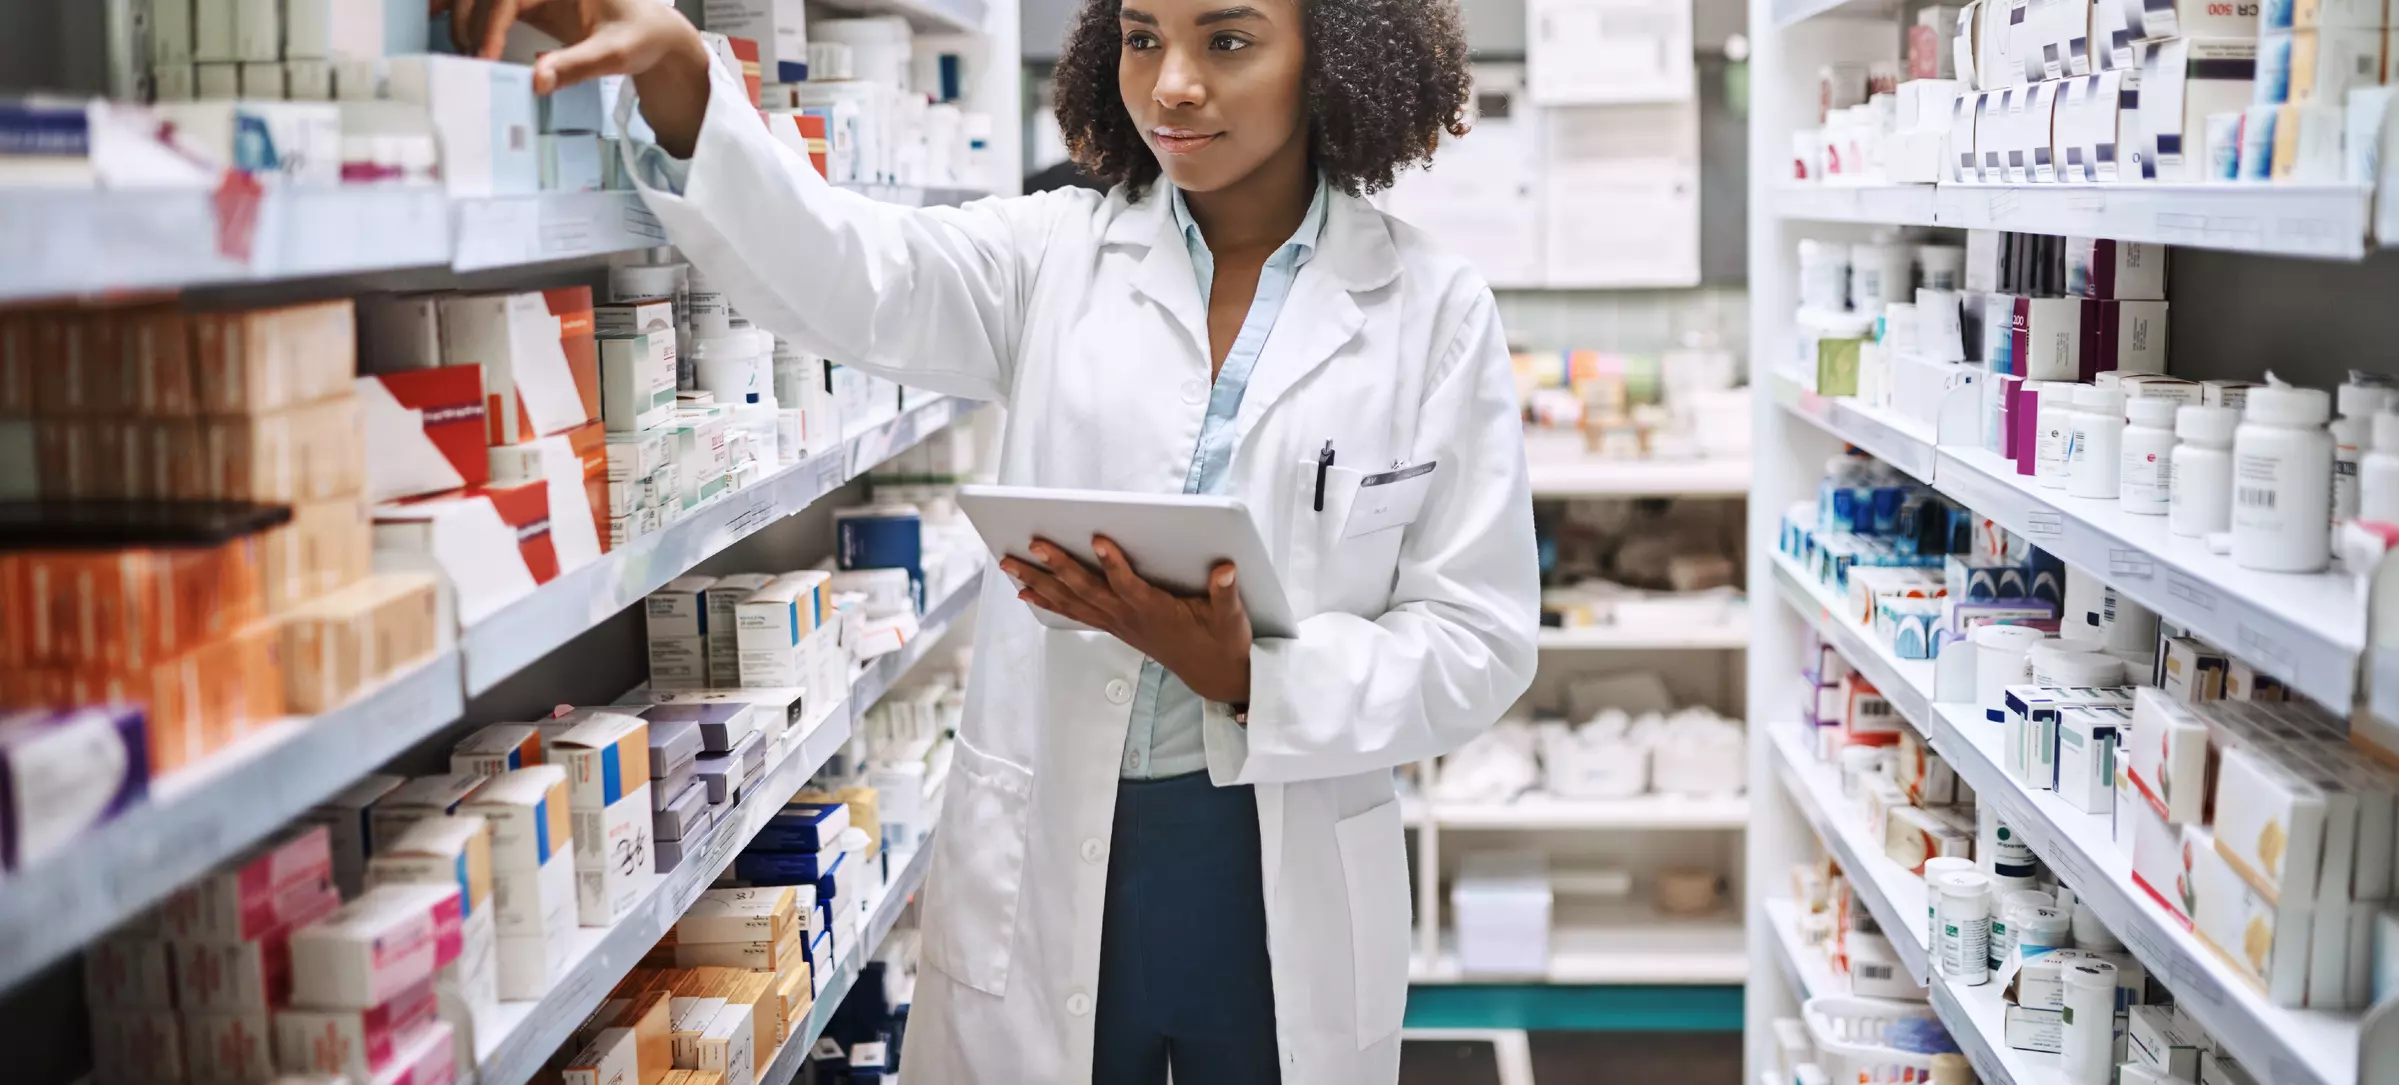 pharmacist looking for prescriptions